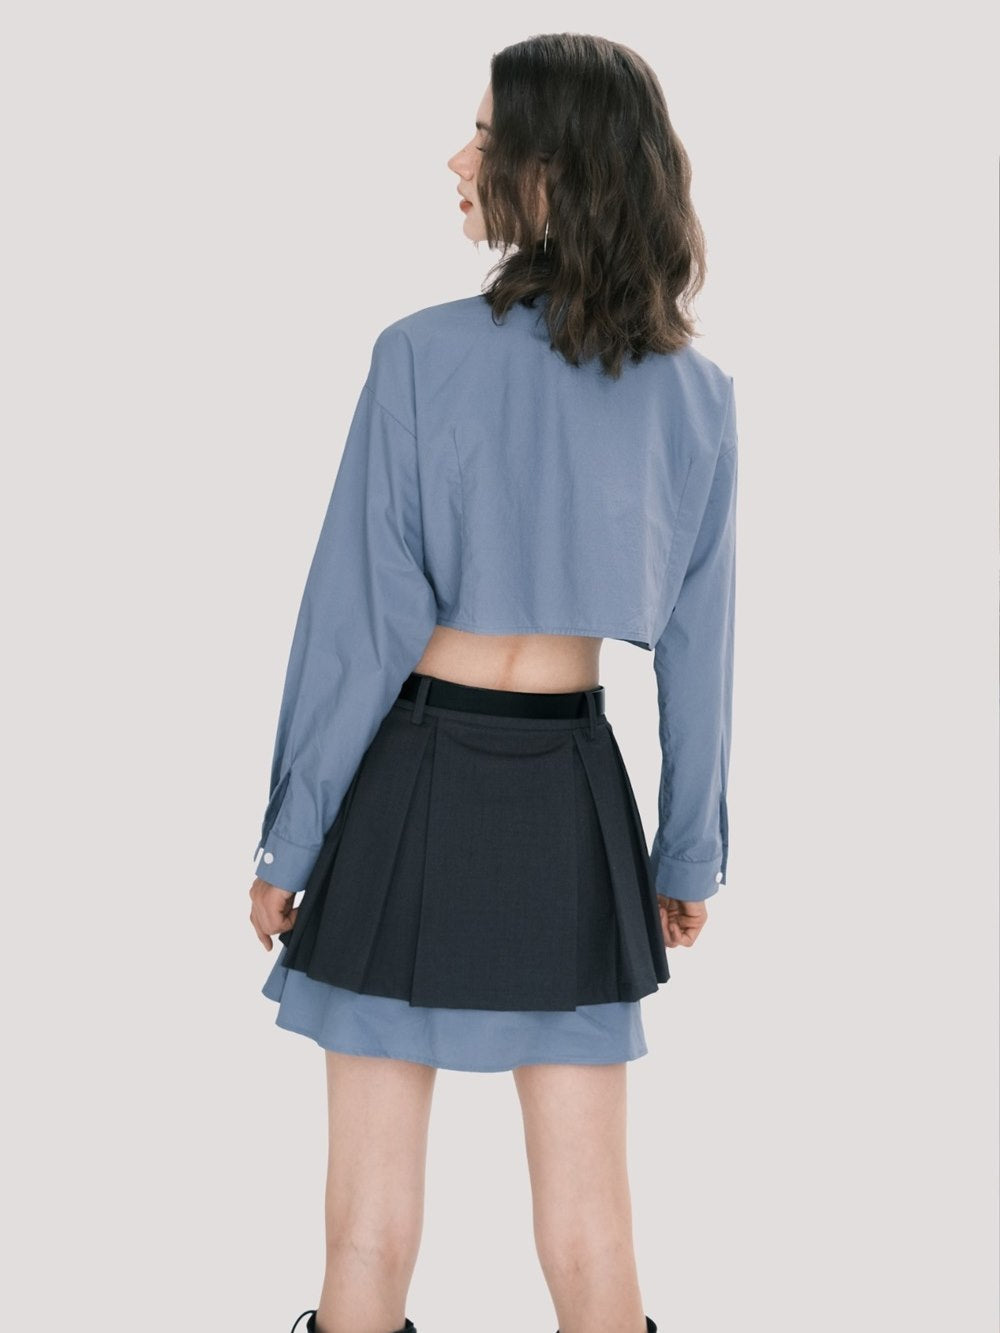 Chic Scholar Cropped Shirt And Pleated Skirt Set - chiclara